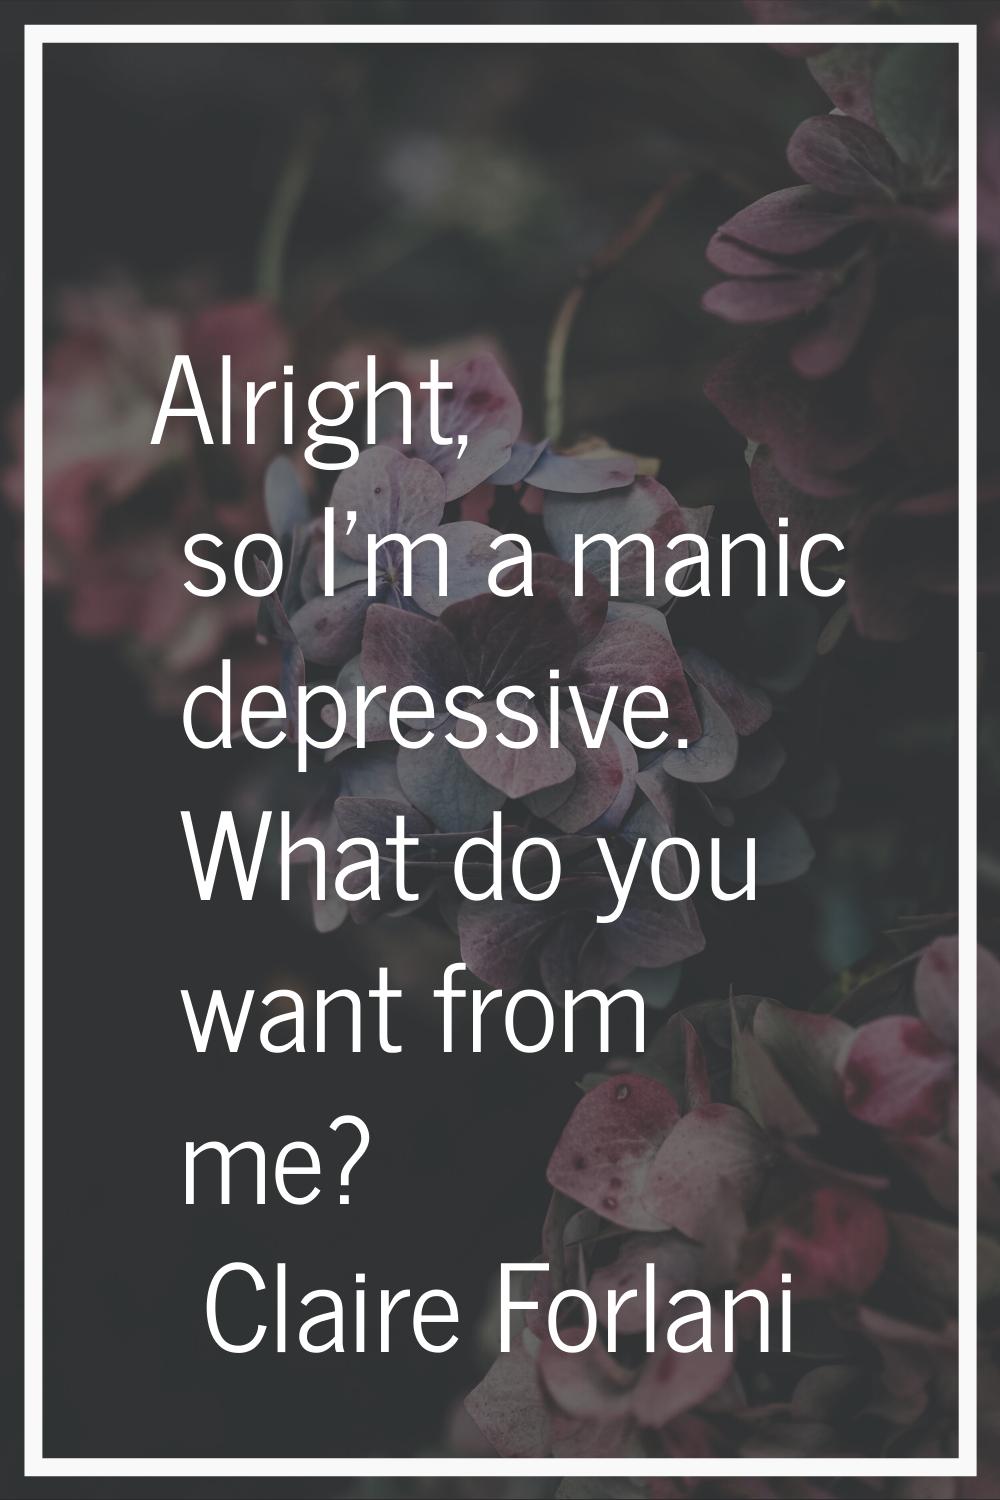 Alright, so I'm a manic depressive. What do you want from me?